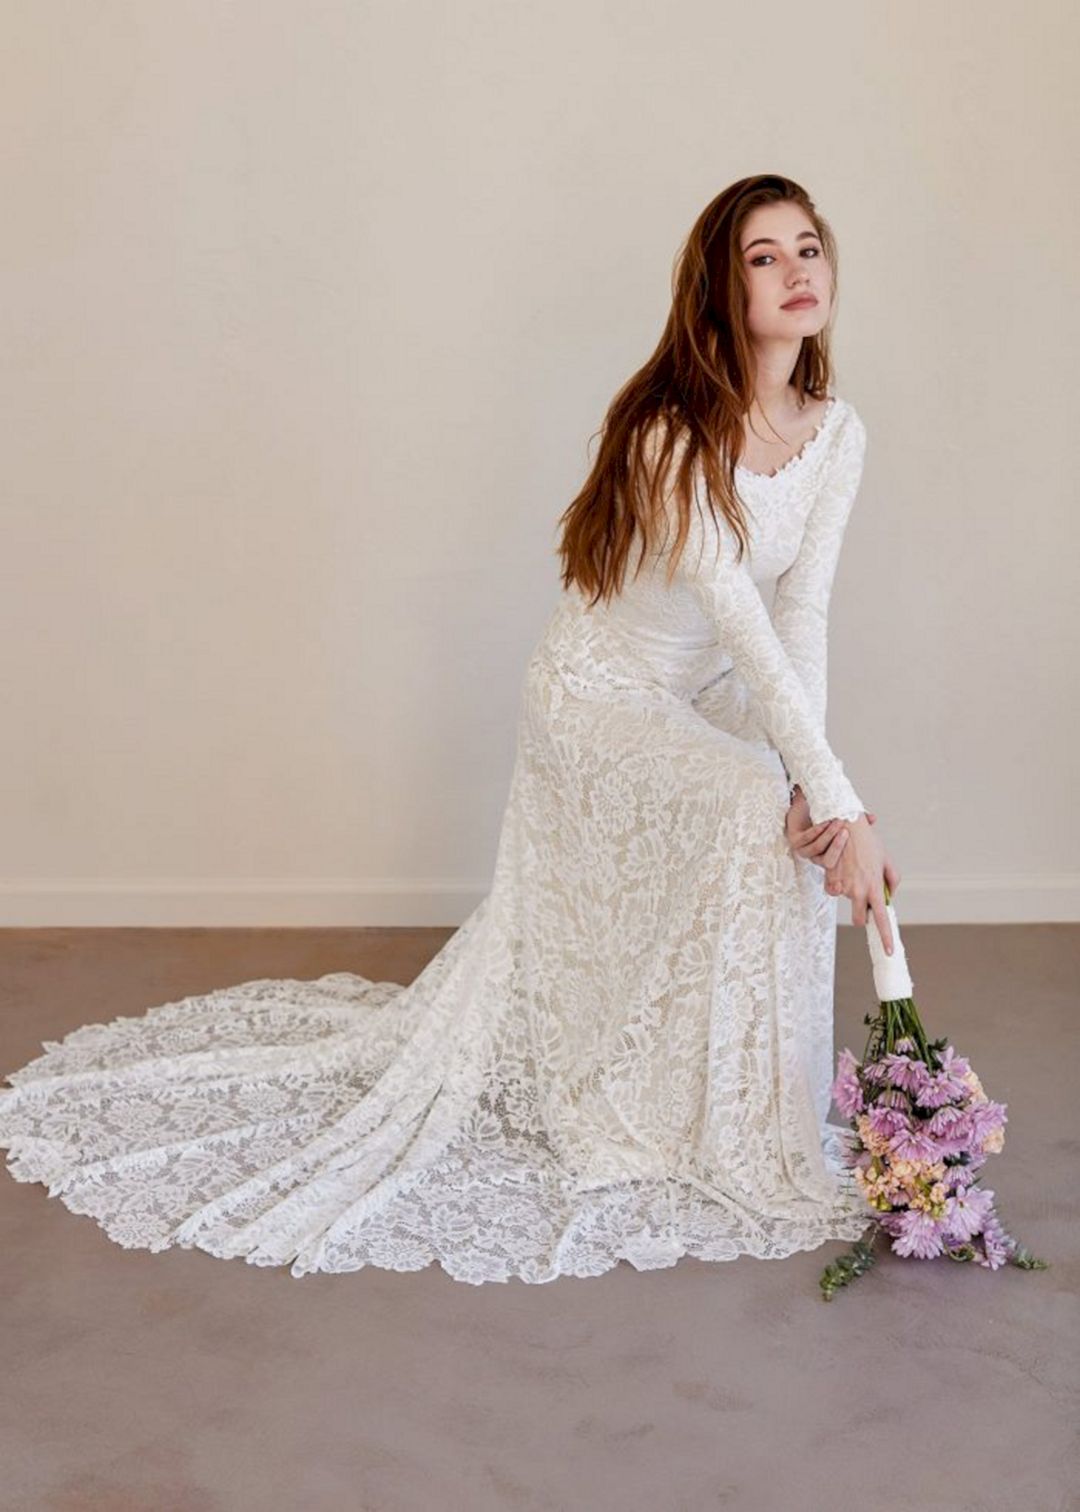 Long sleeve lace wedding dress from chicvintagebrides